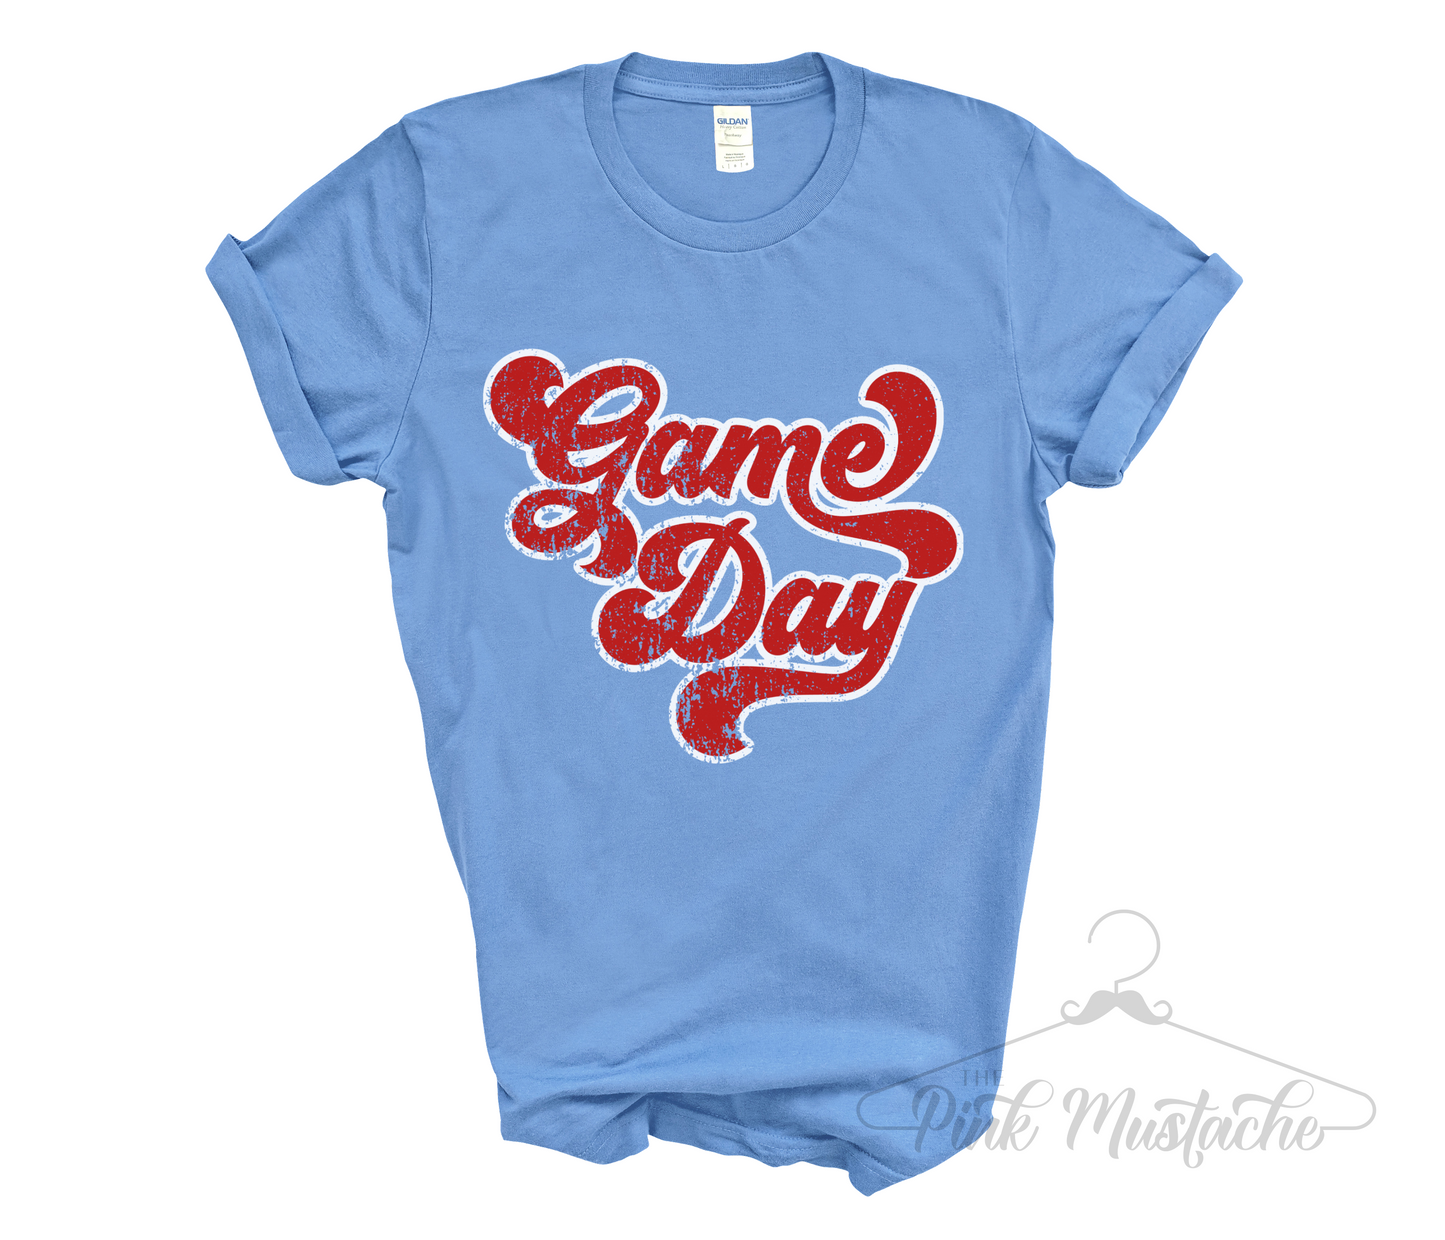 Game Day Red, White, Blue Soft Style Tee -Unisex Adult Sized Sports Shirt/ Sports Mom Tee